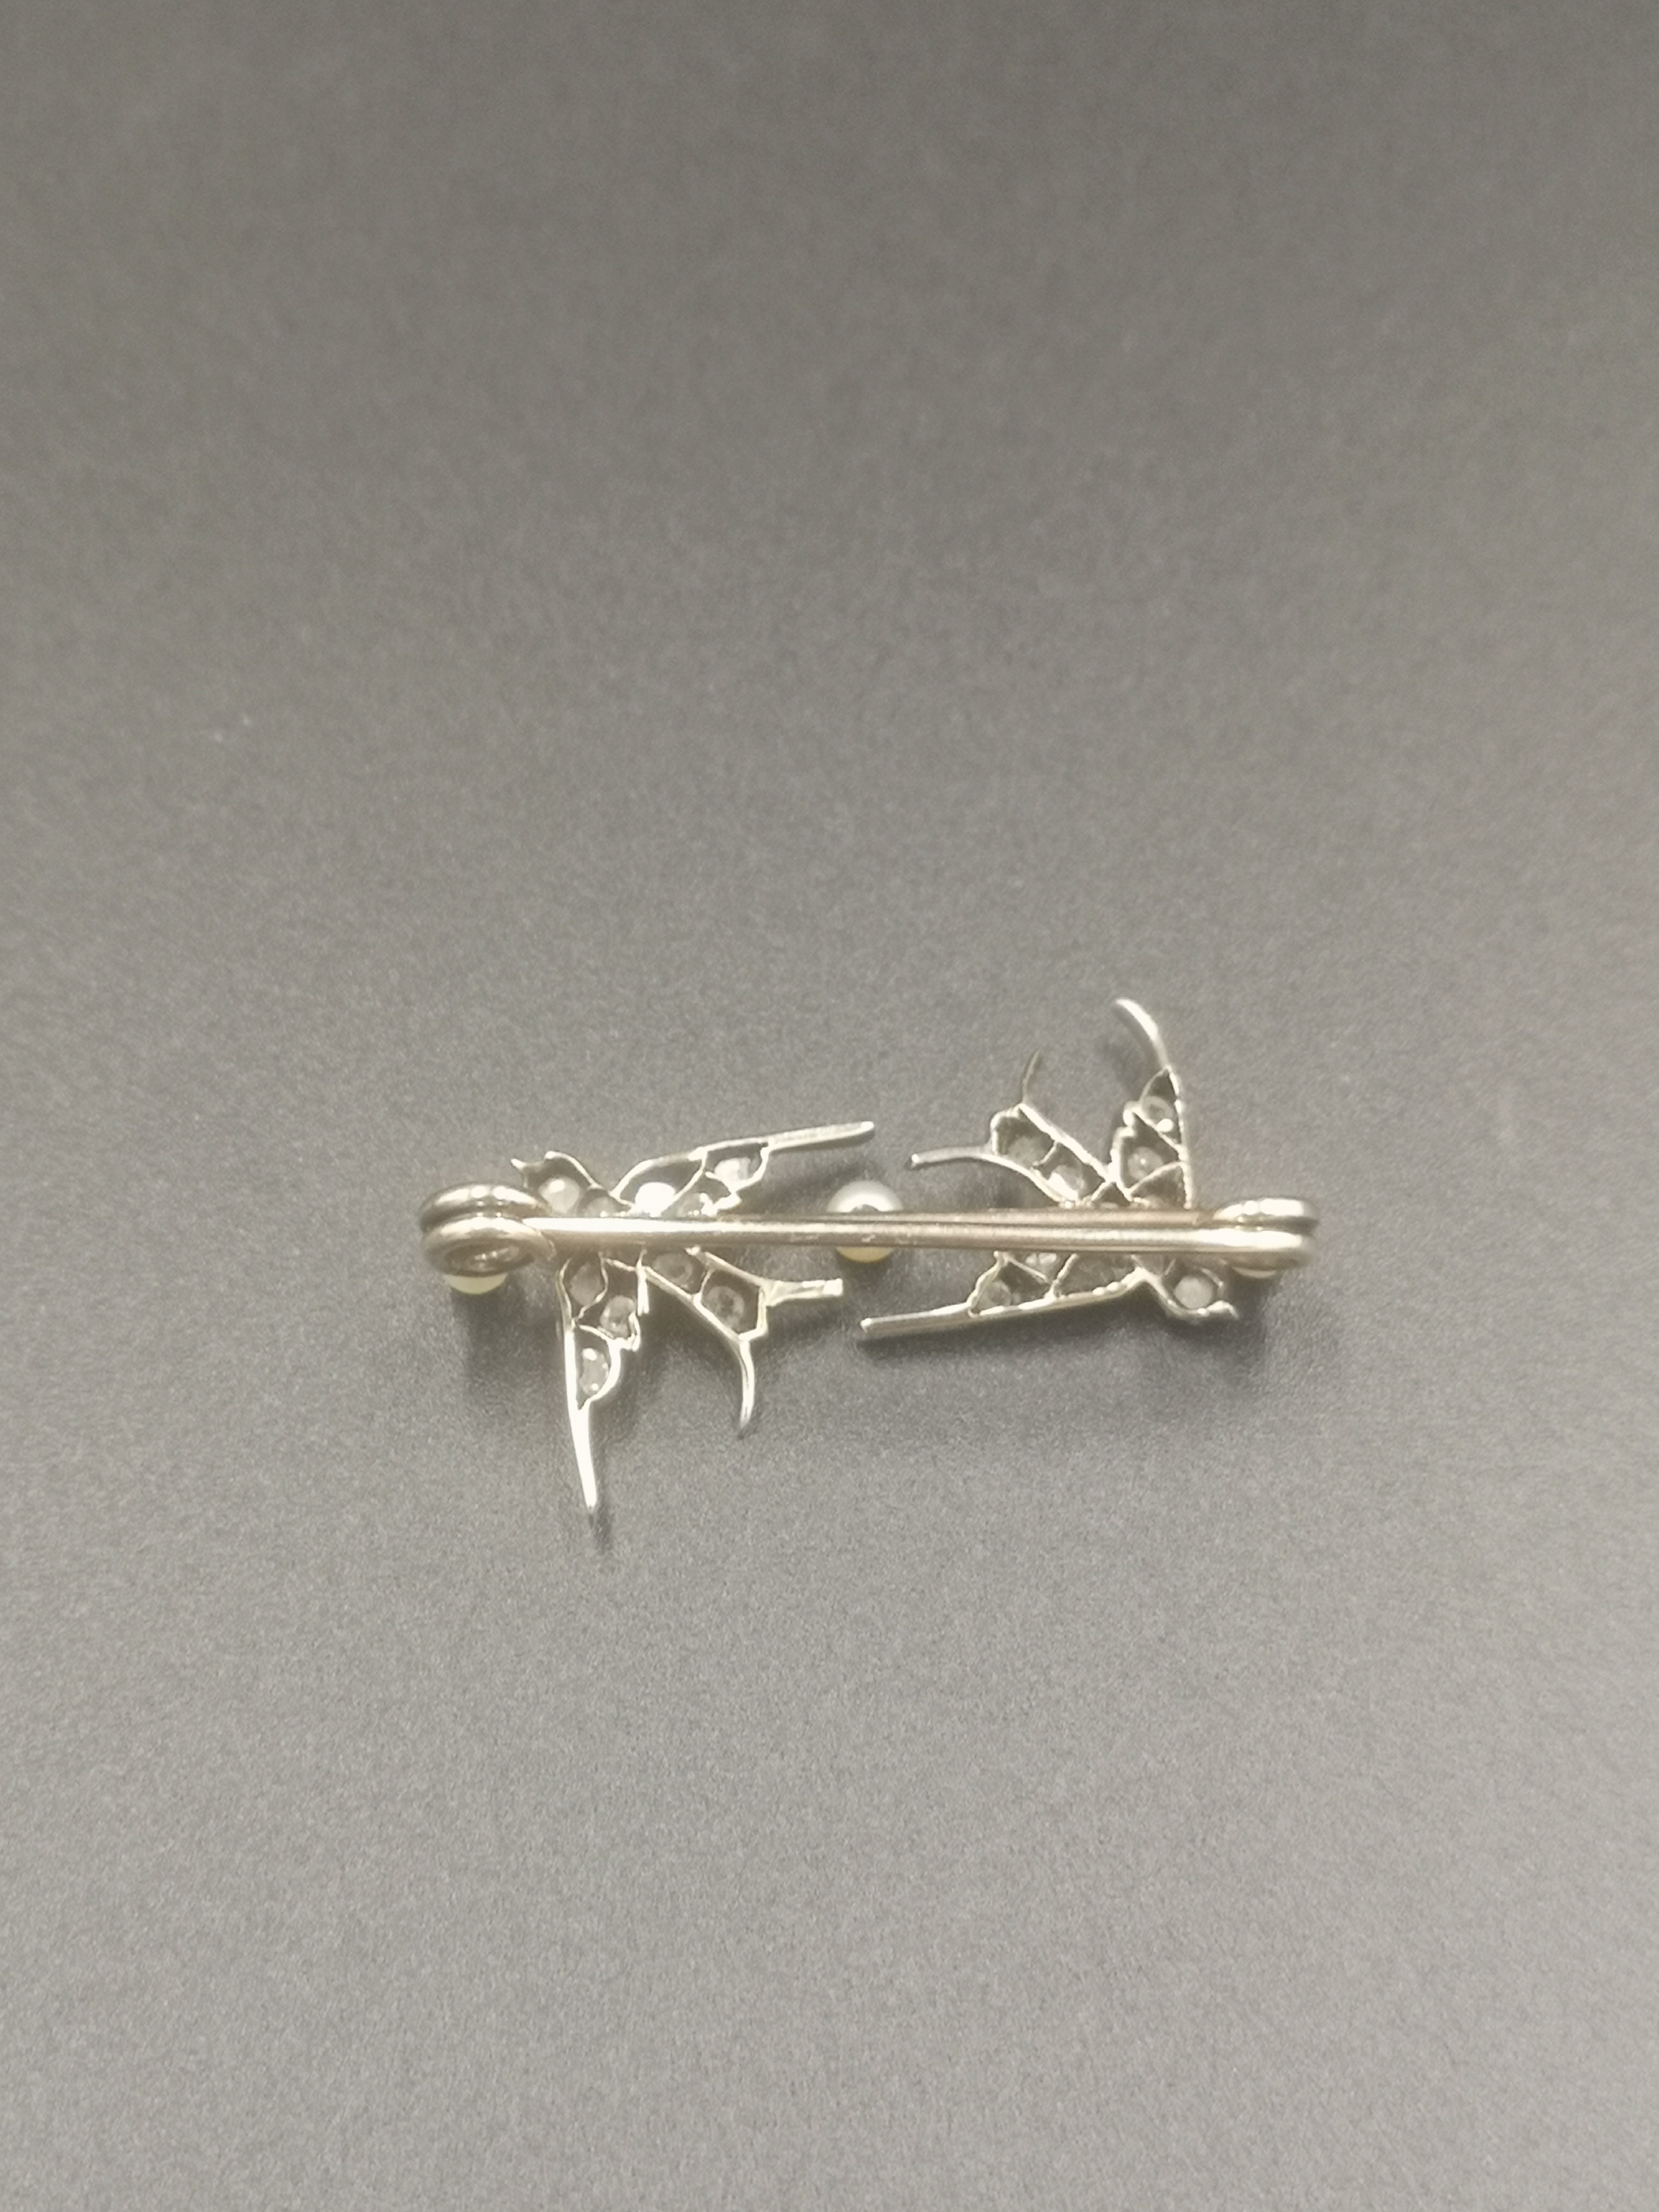 White metal brooch set with diamonds - Image 3 of 4